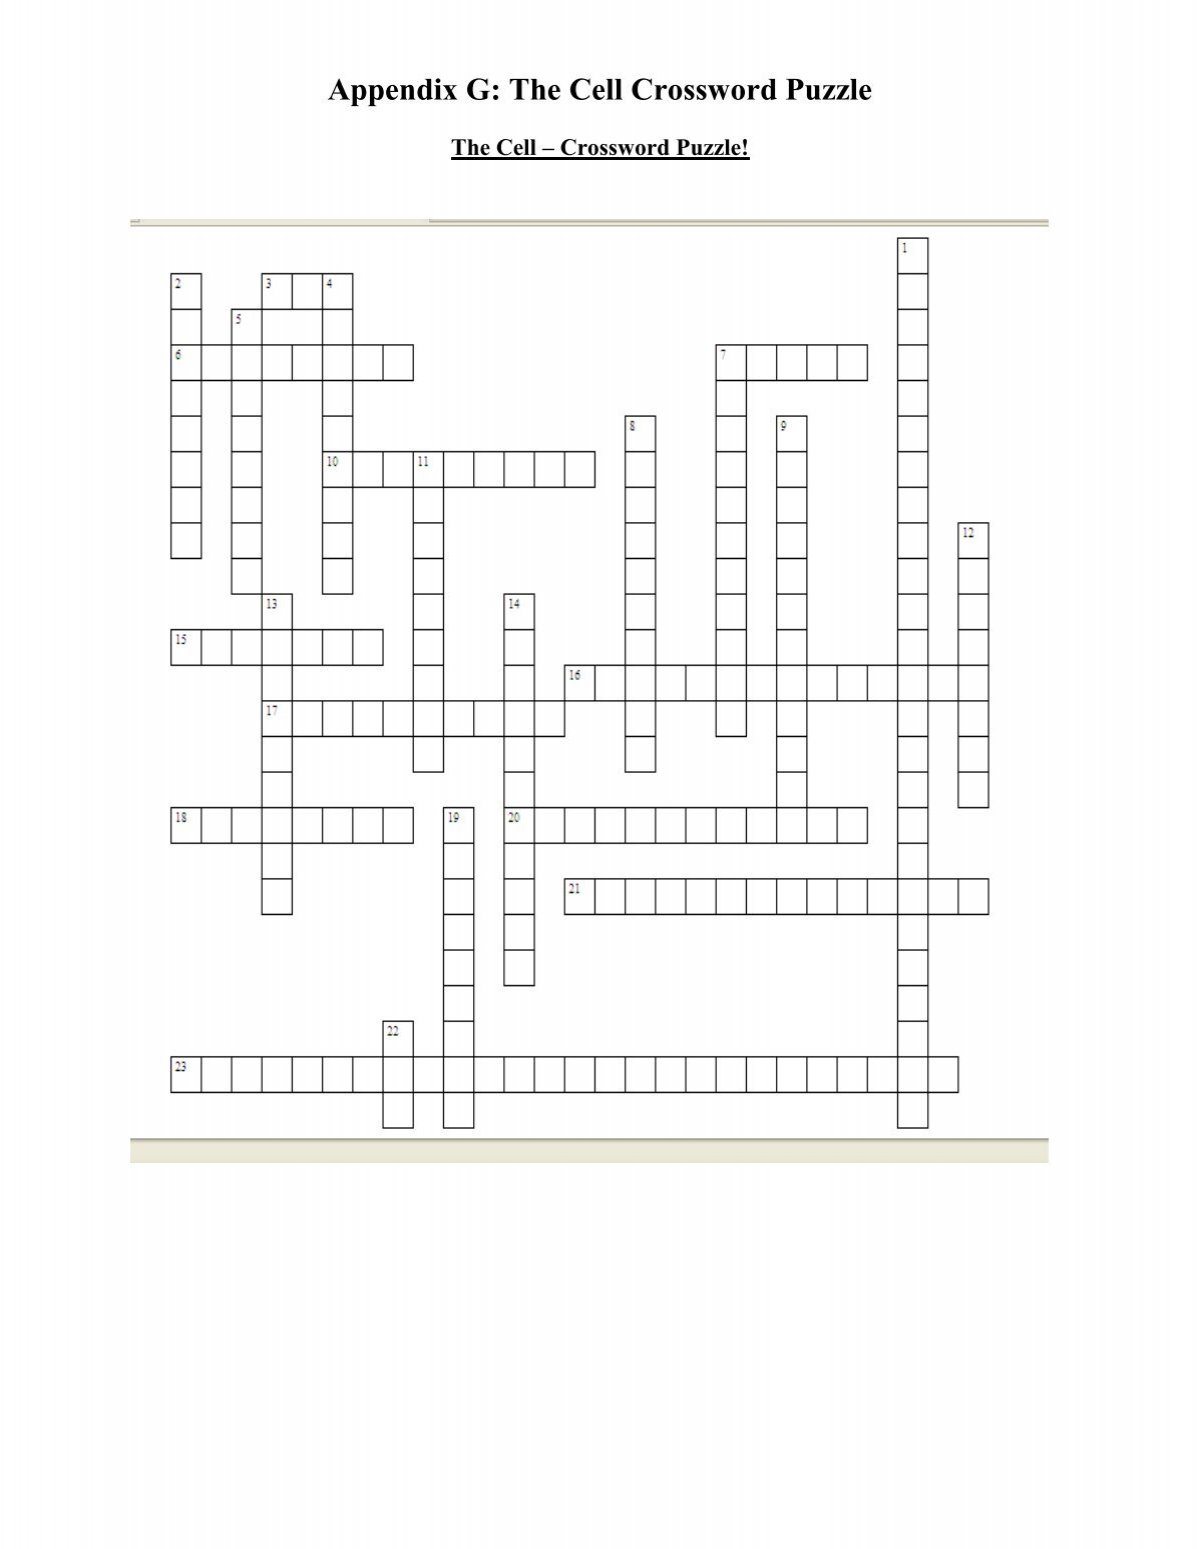 Appendix G: The Cell Crossword Puzzle